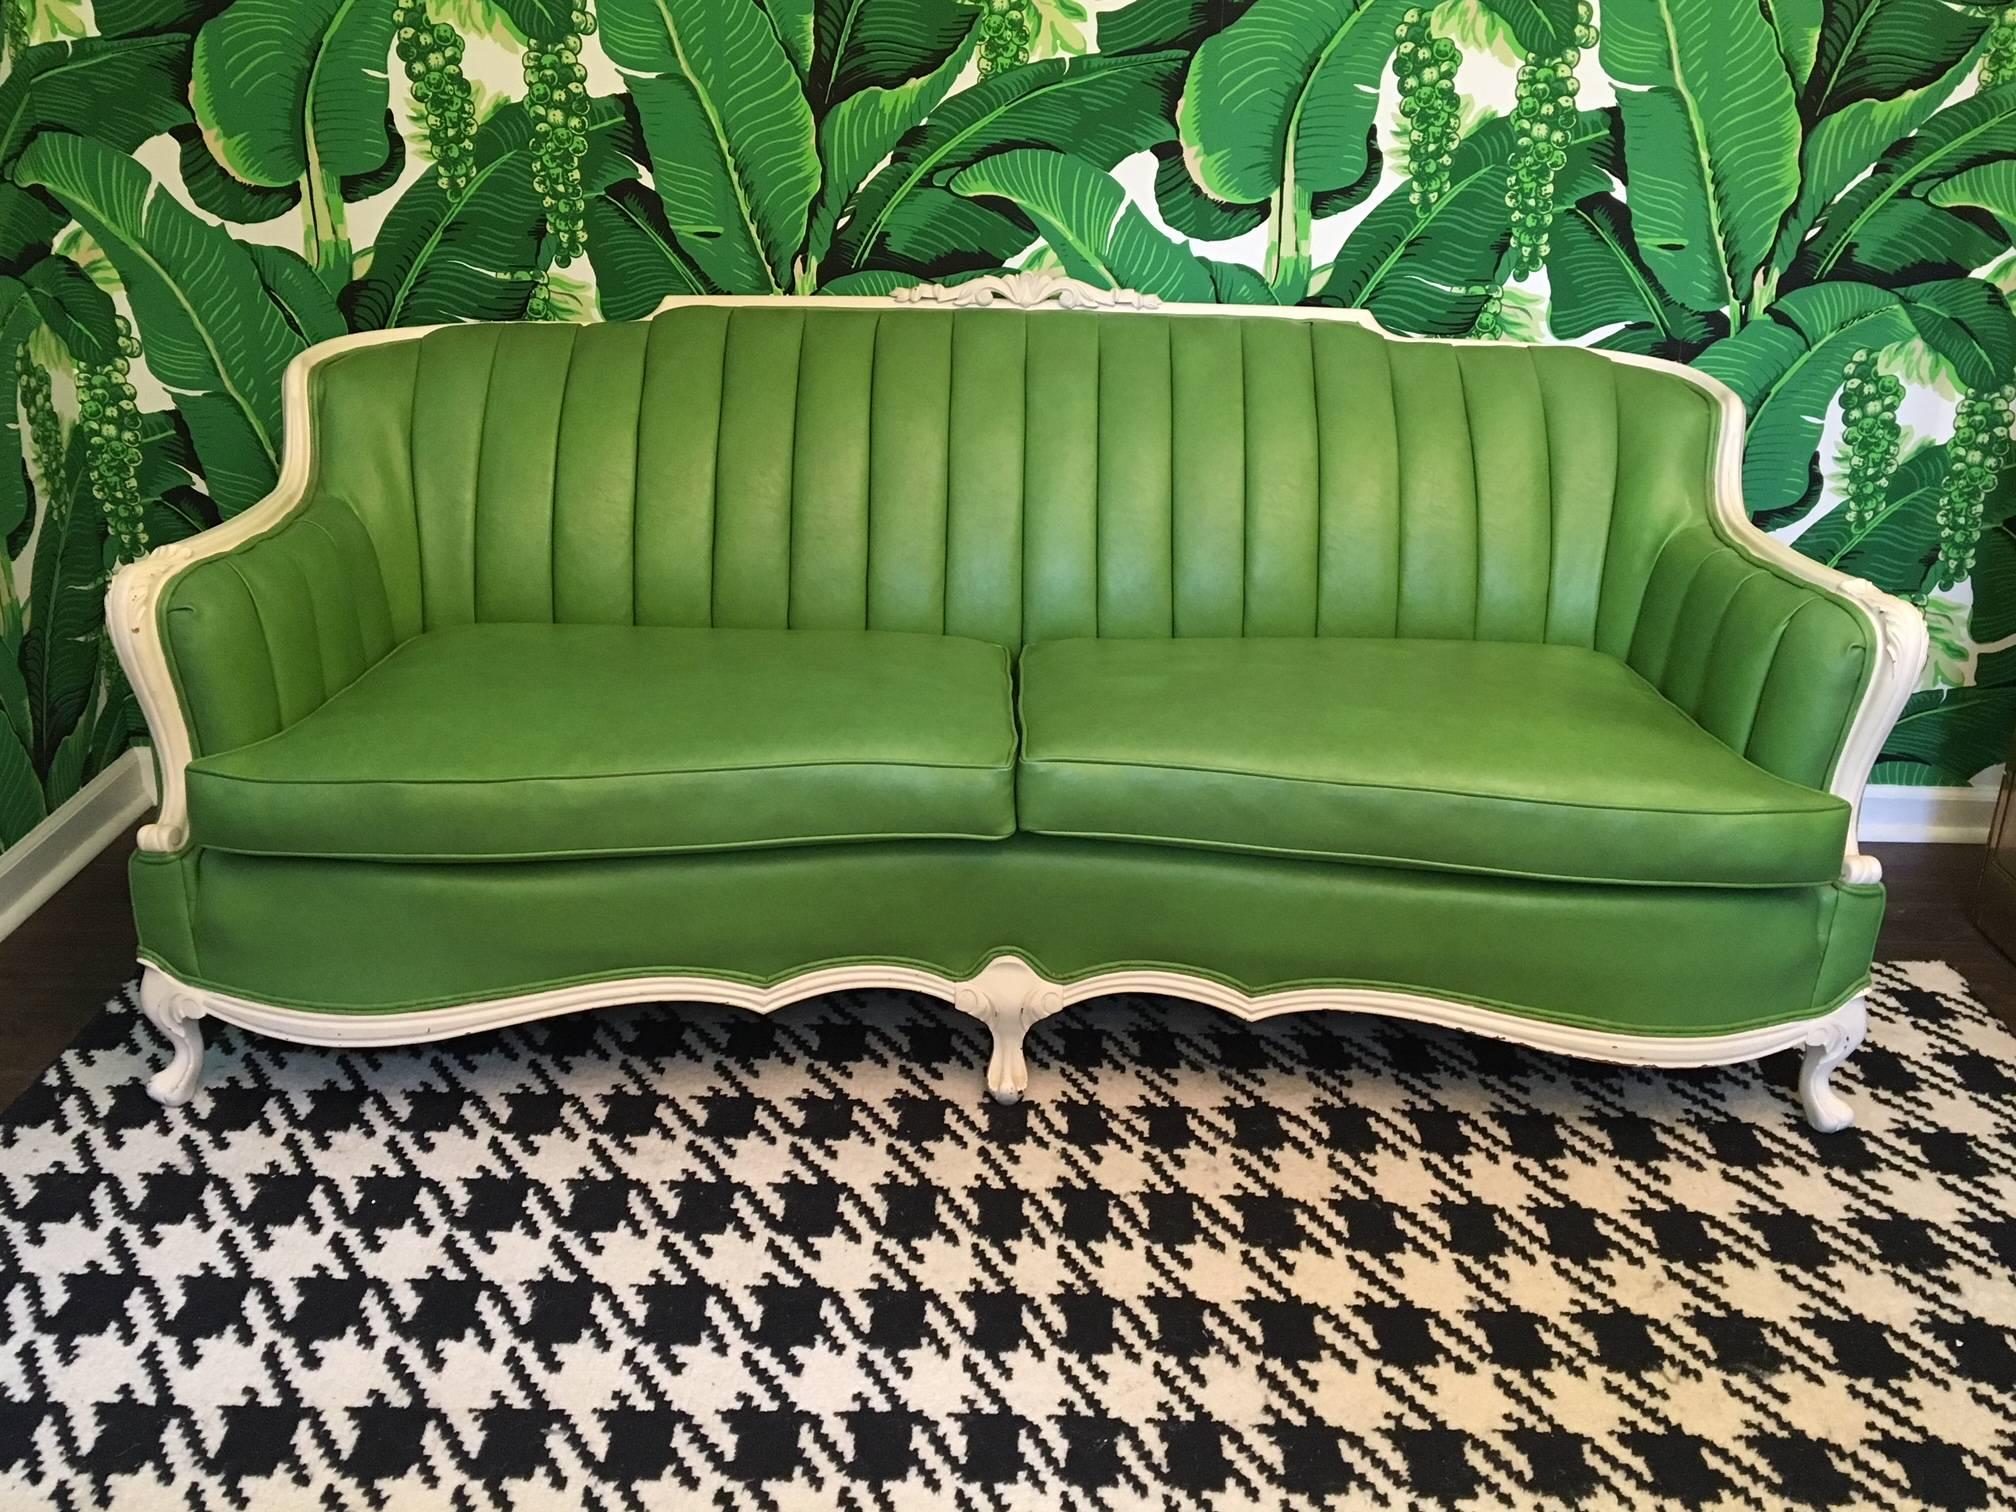 Striking green leather upholstery and a clean white frame make this beautiful vintage sofa the perfect example of Dorothy Draper's iconic style, circa 1960s. Excellent condition. Leather is near perfect and frame has only minor abrasions consistent